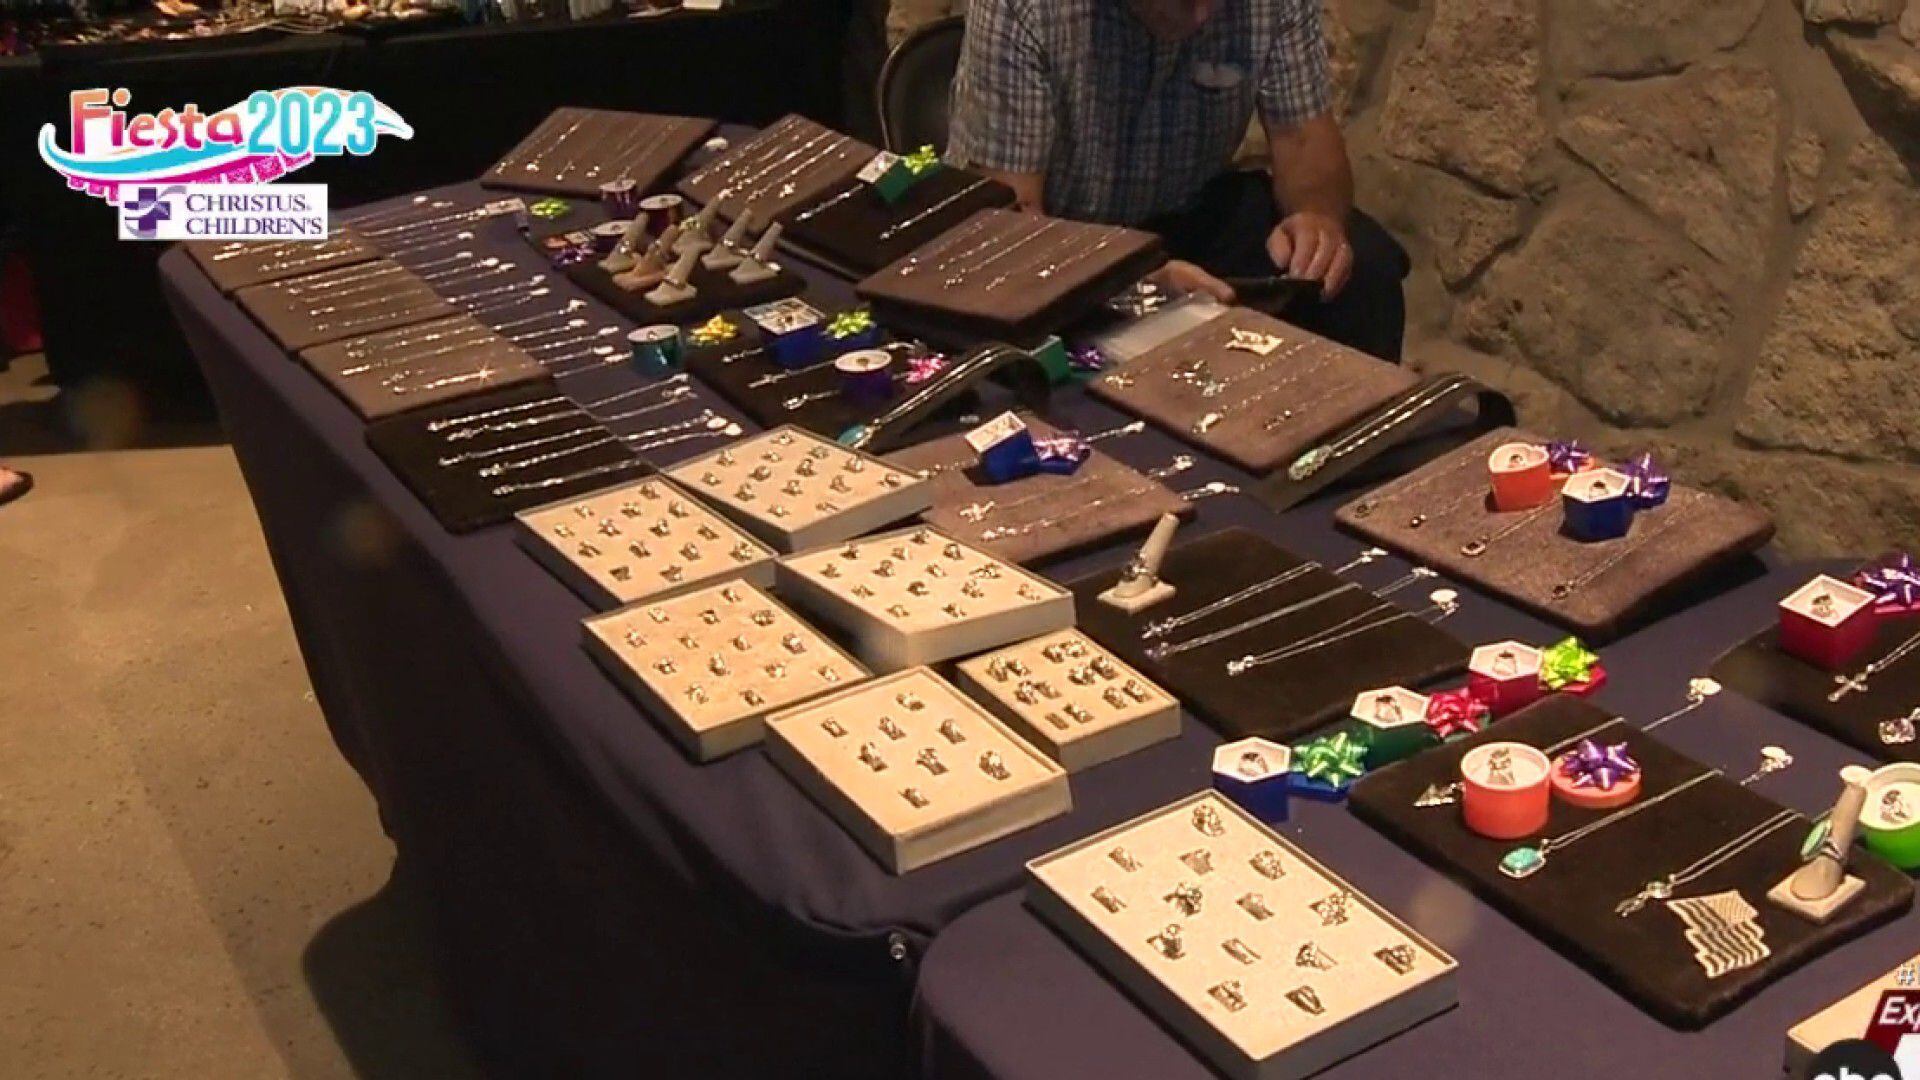 Fiesta Artisan Show at River Walk offering several handcrafted items  